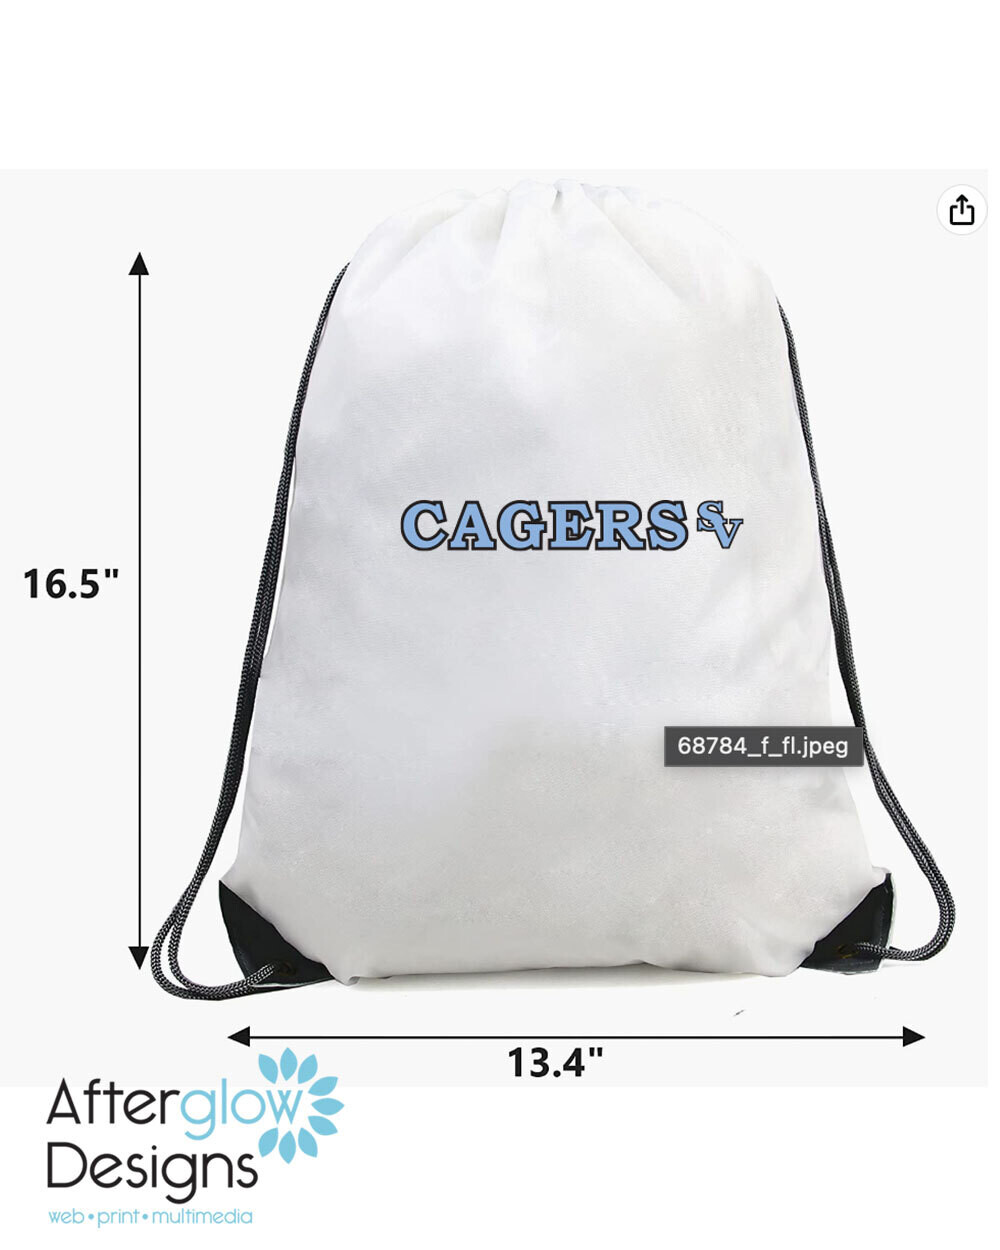 CAGERS SV on White Drawstring Backpack Bags